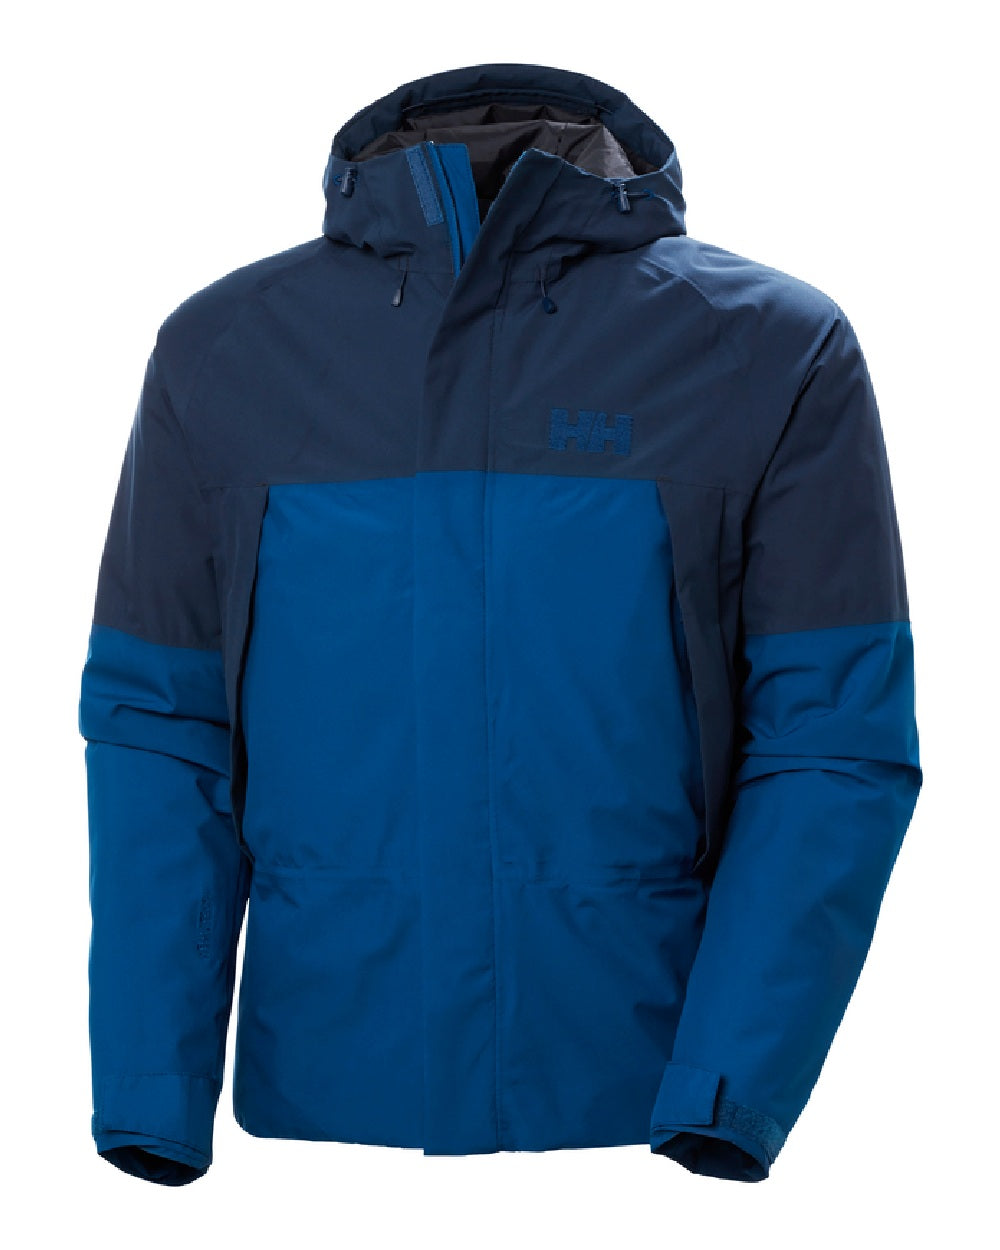 Helly Hansen Mens Banff Insulated Shell Jacket in Deep Fjord 